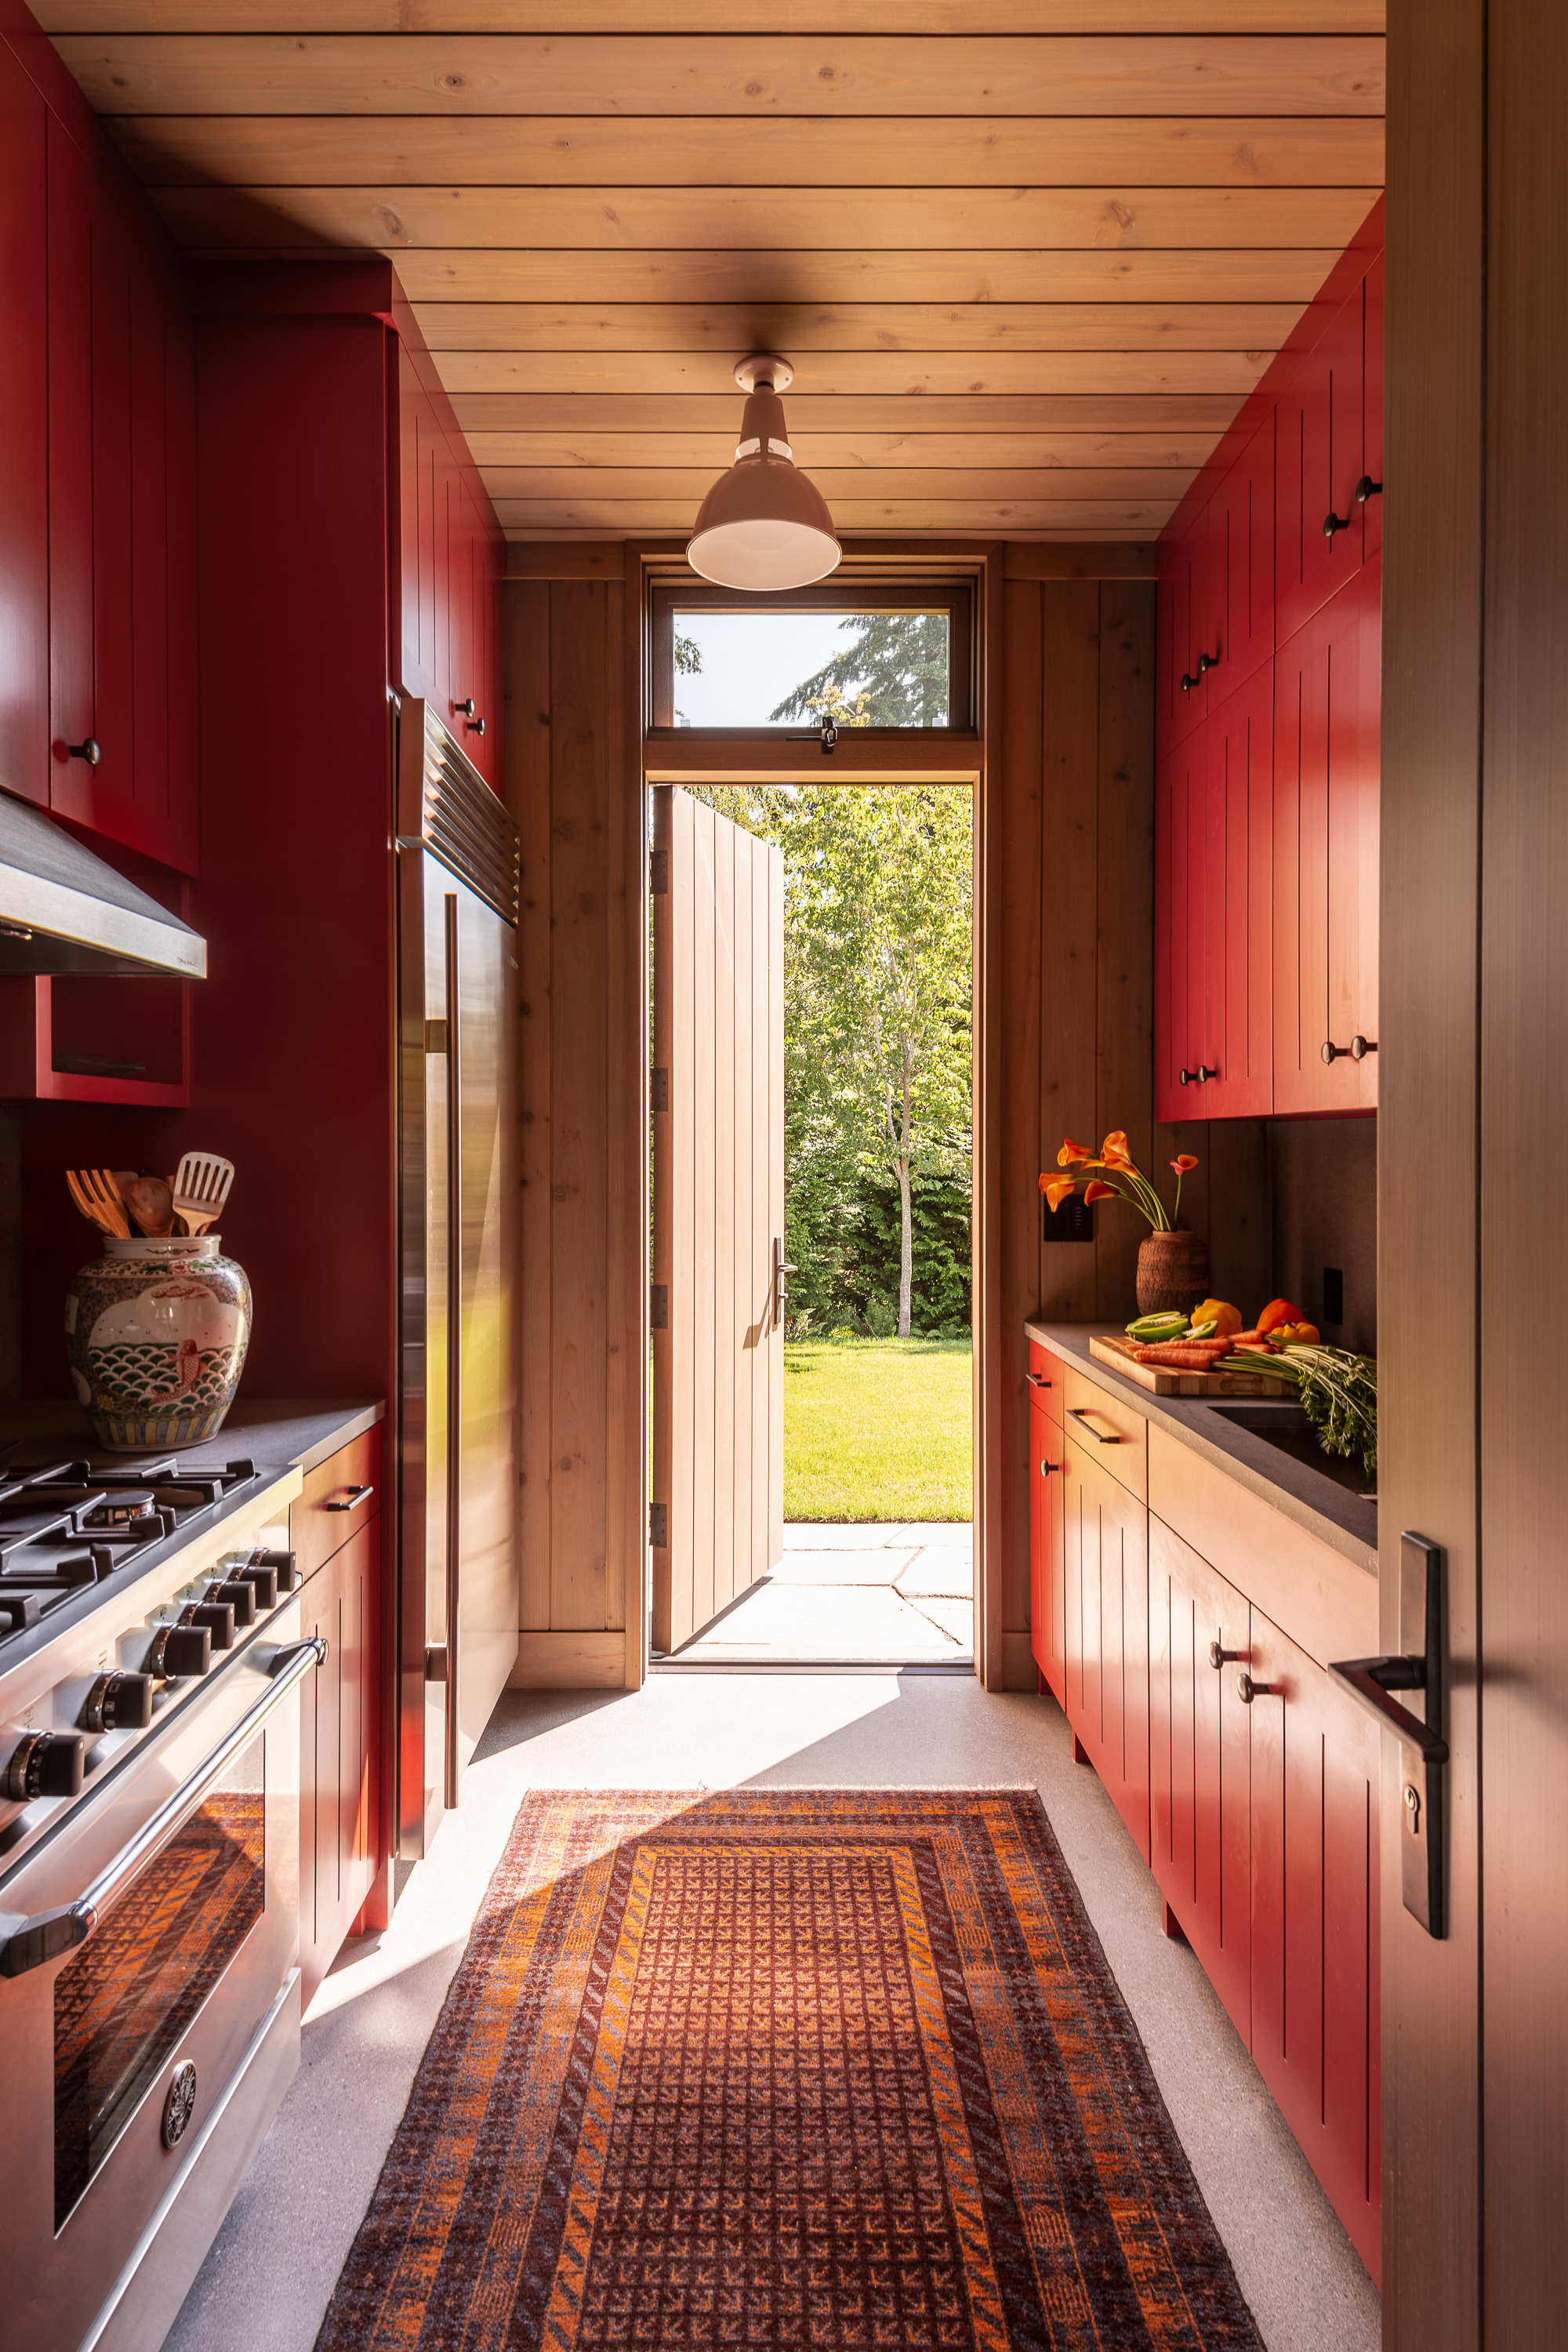 The galley-style kitchen in the Whidbey Island Field House features bold red cabinet paint, adding a vibrant touch to the space.